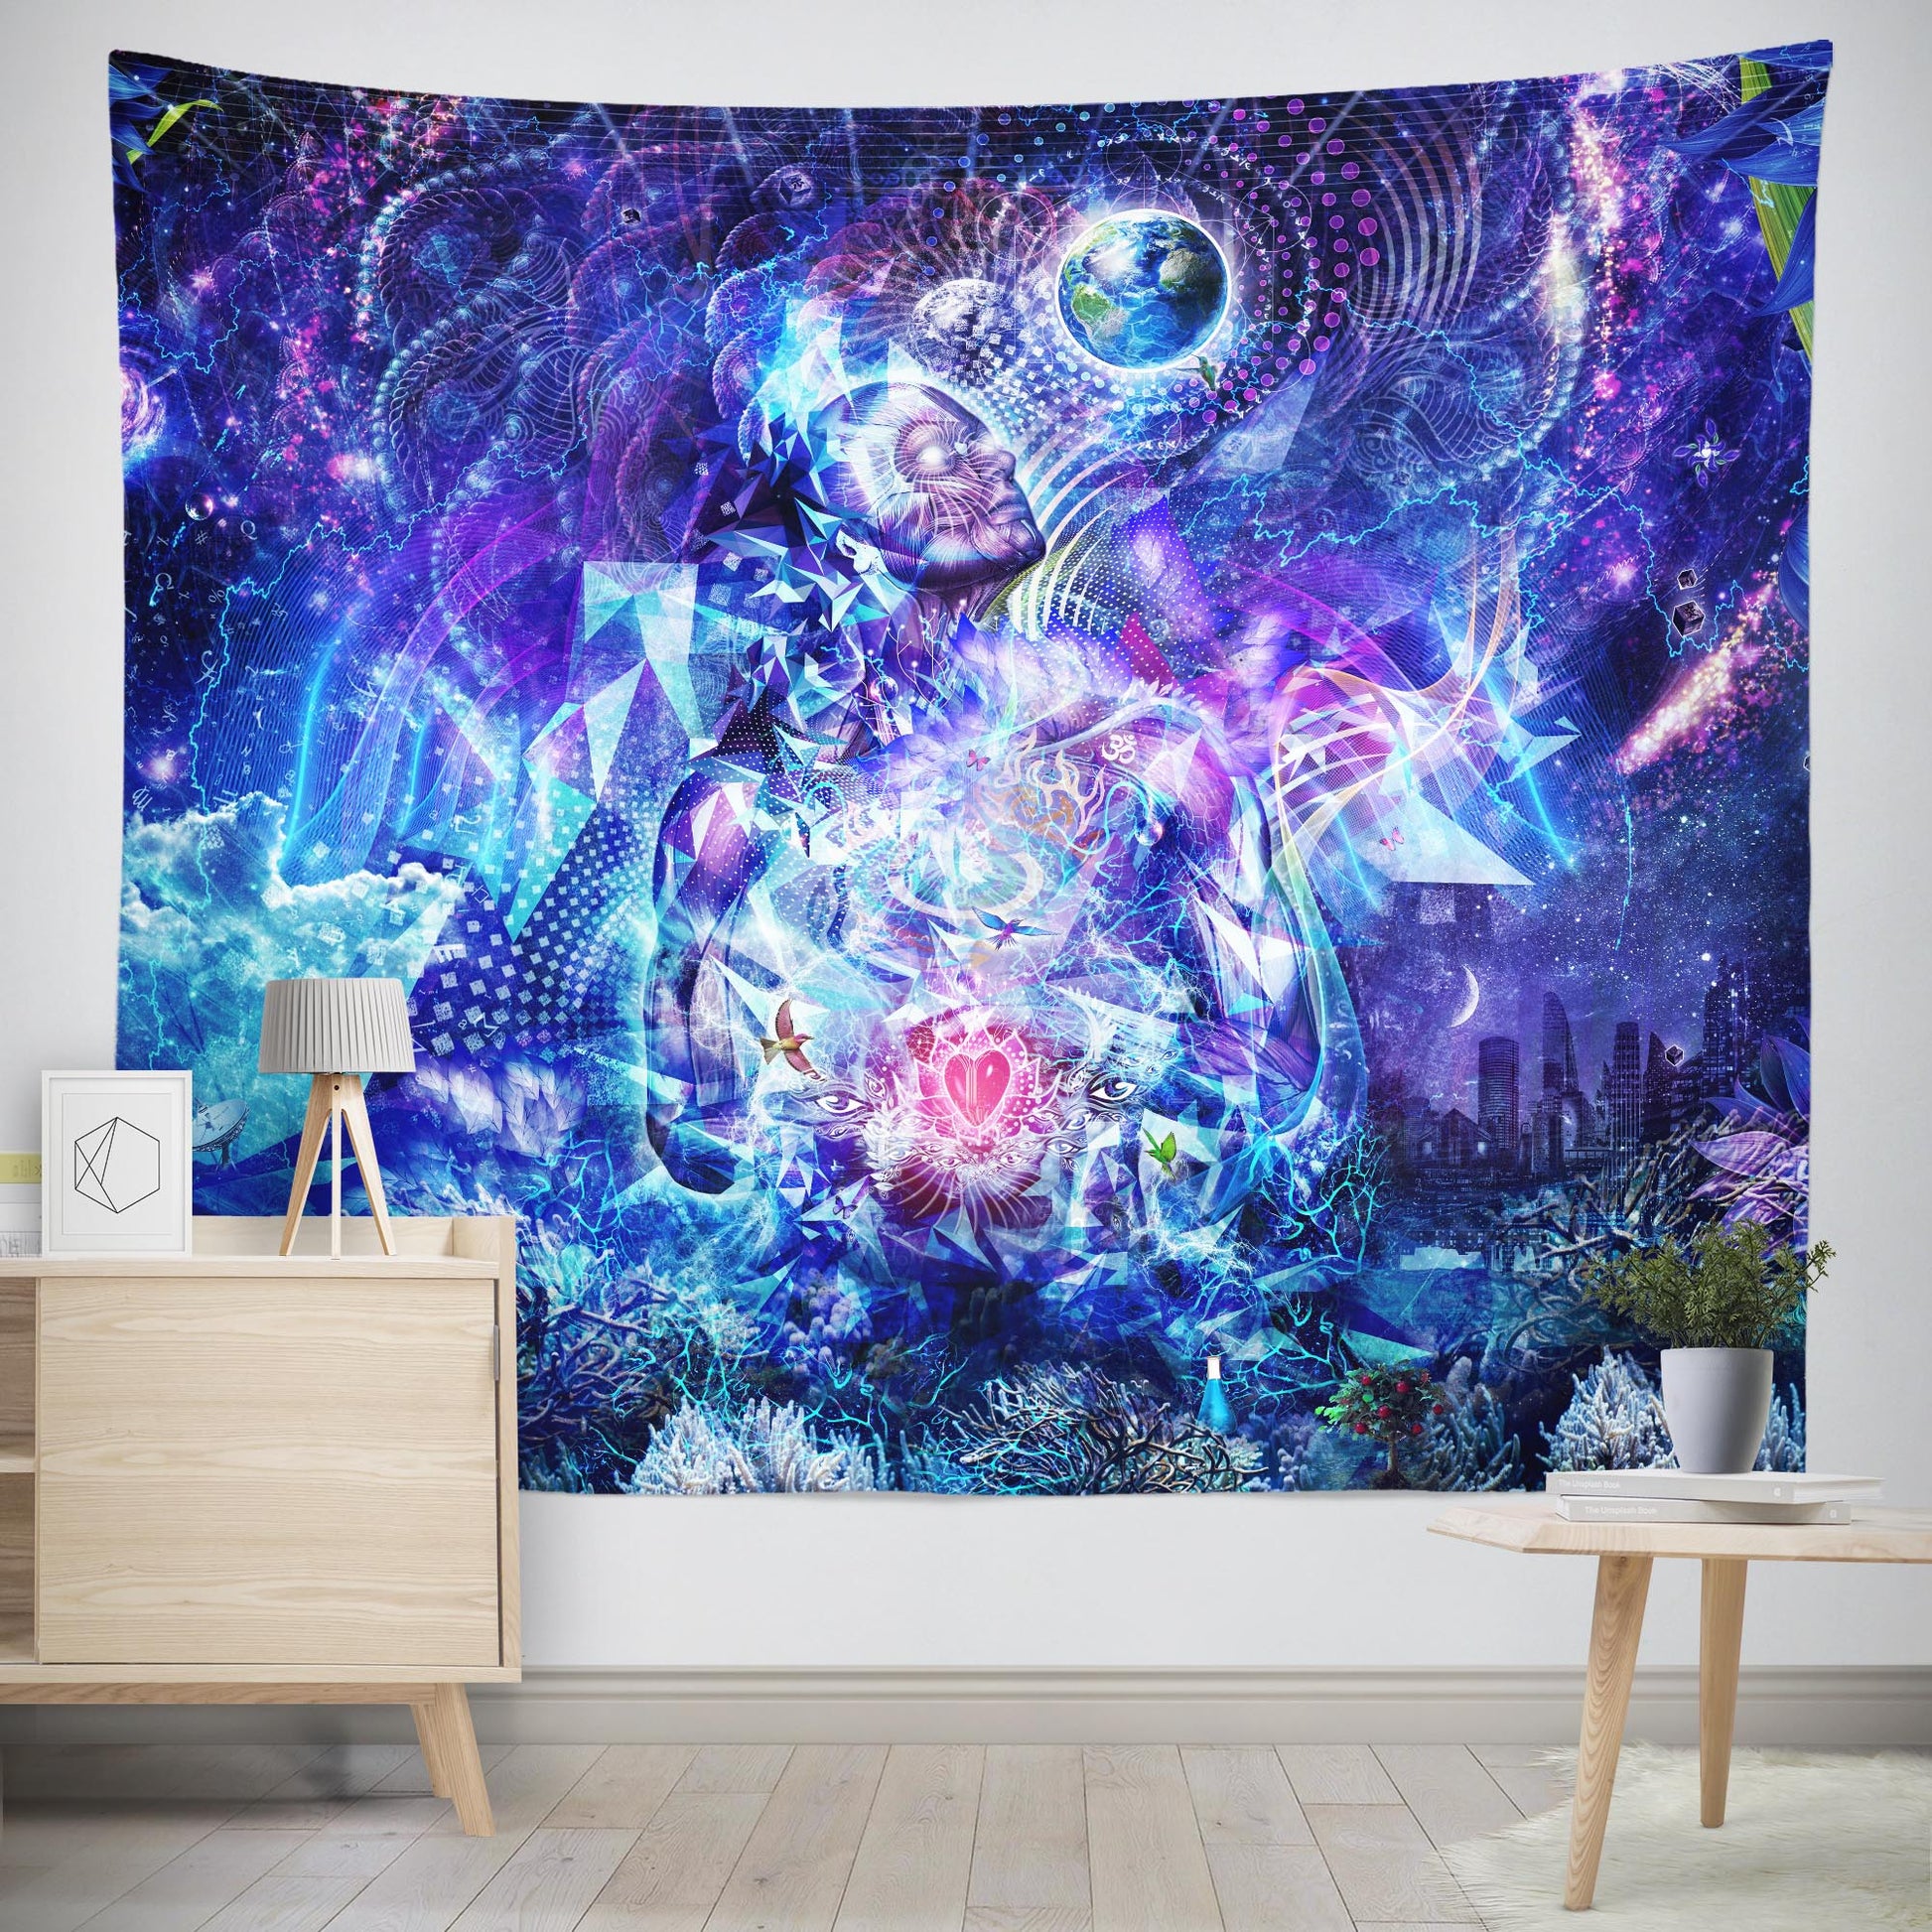 Extra large trippy wall tapestry of transcending man by Cameron Gray